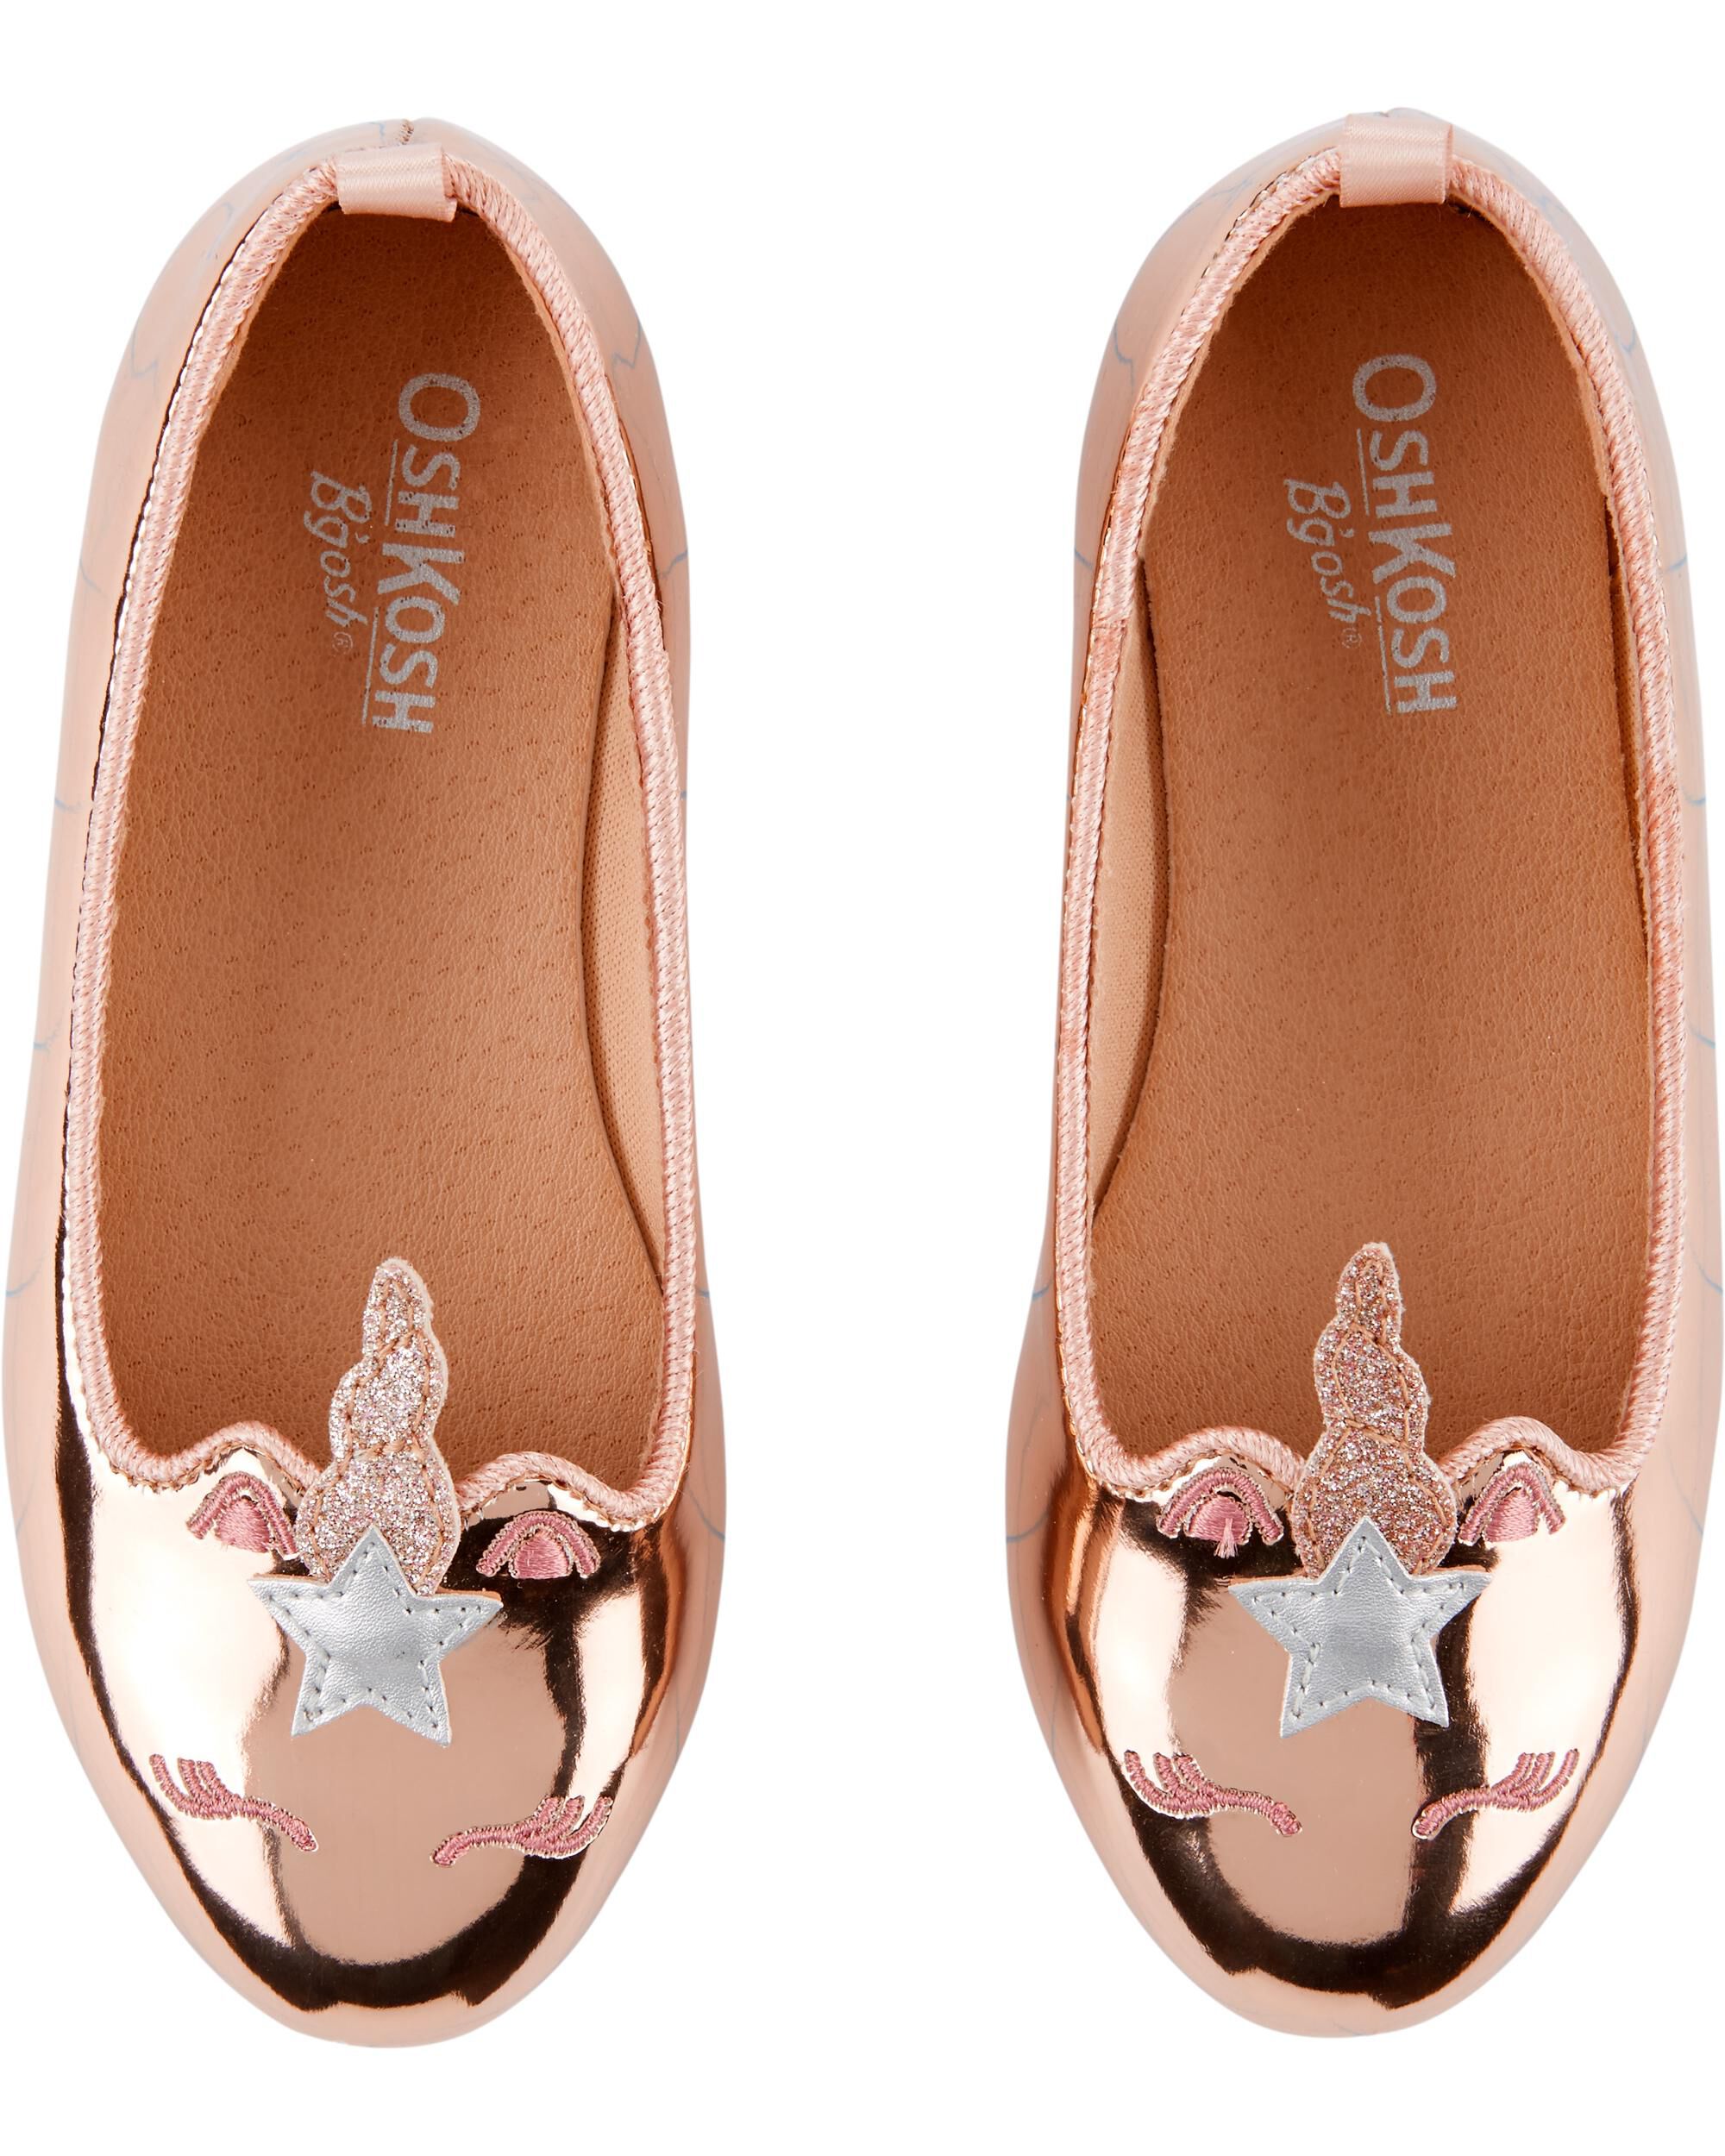 rose gold dress shoes for girls